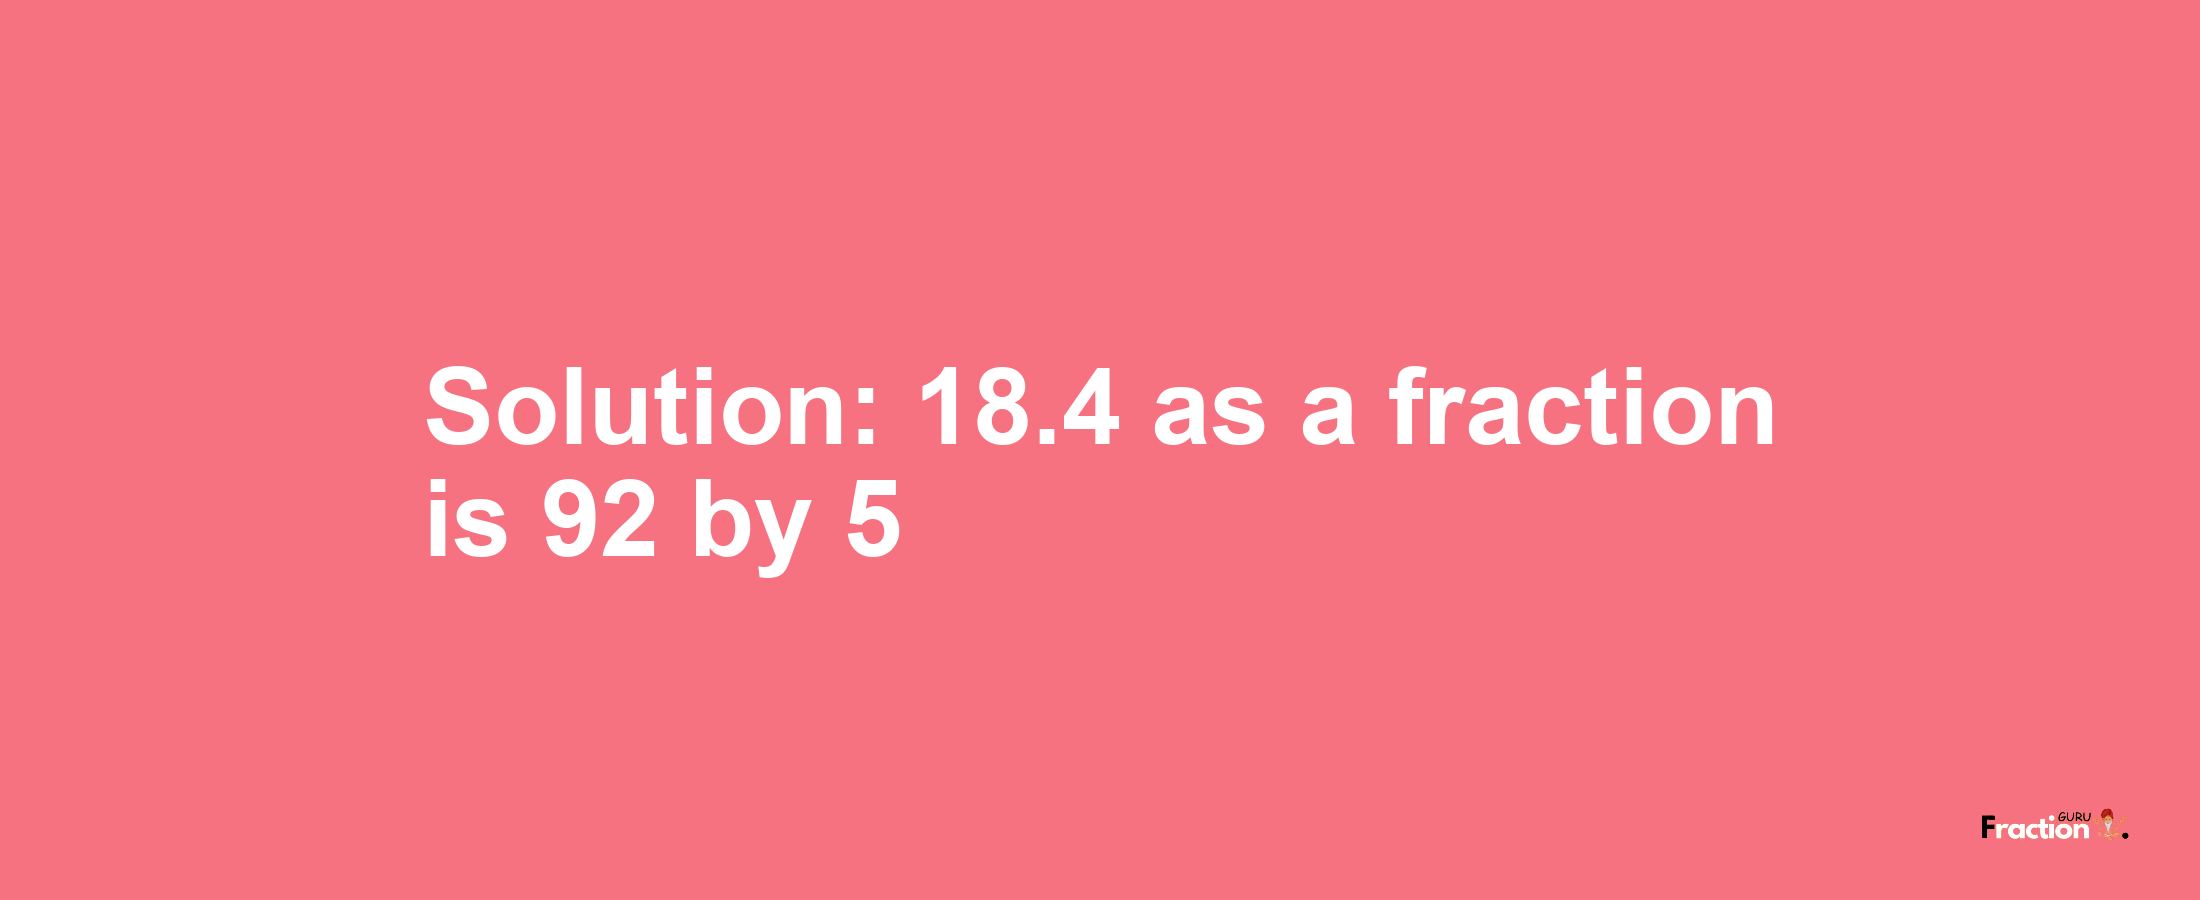 Solution:18.4 as a fraction is 92/5